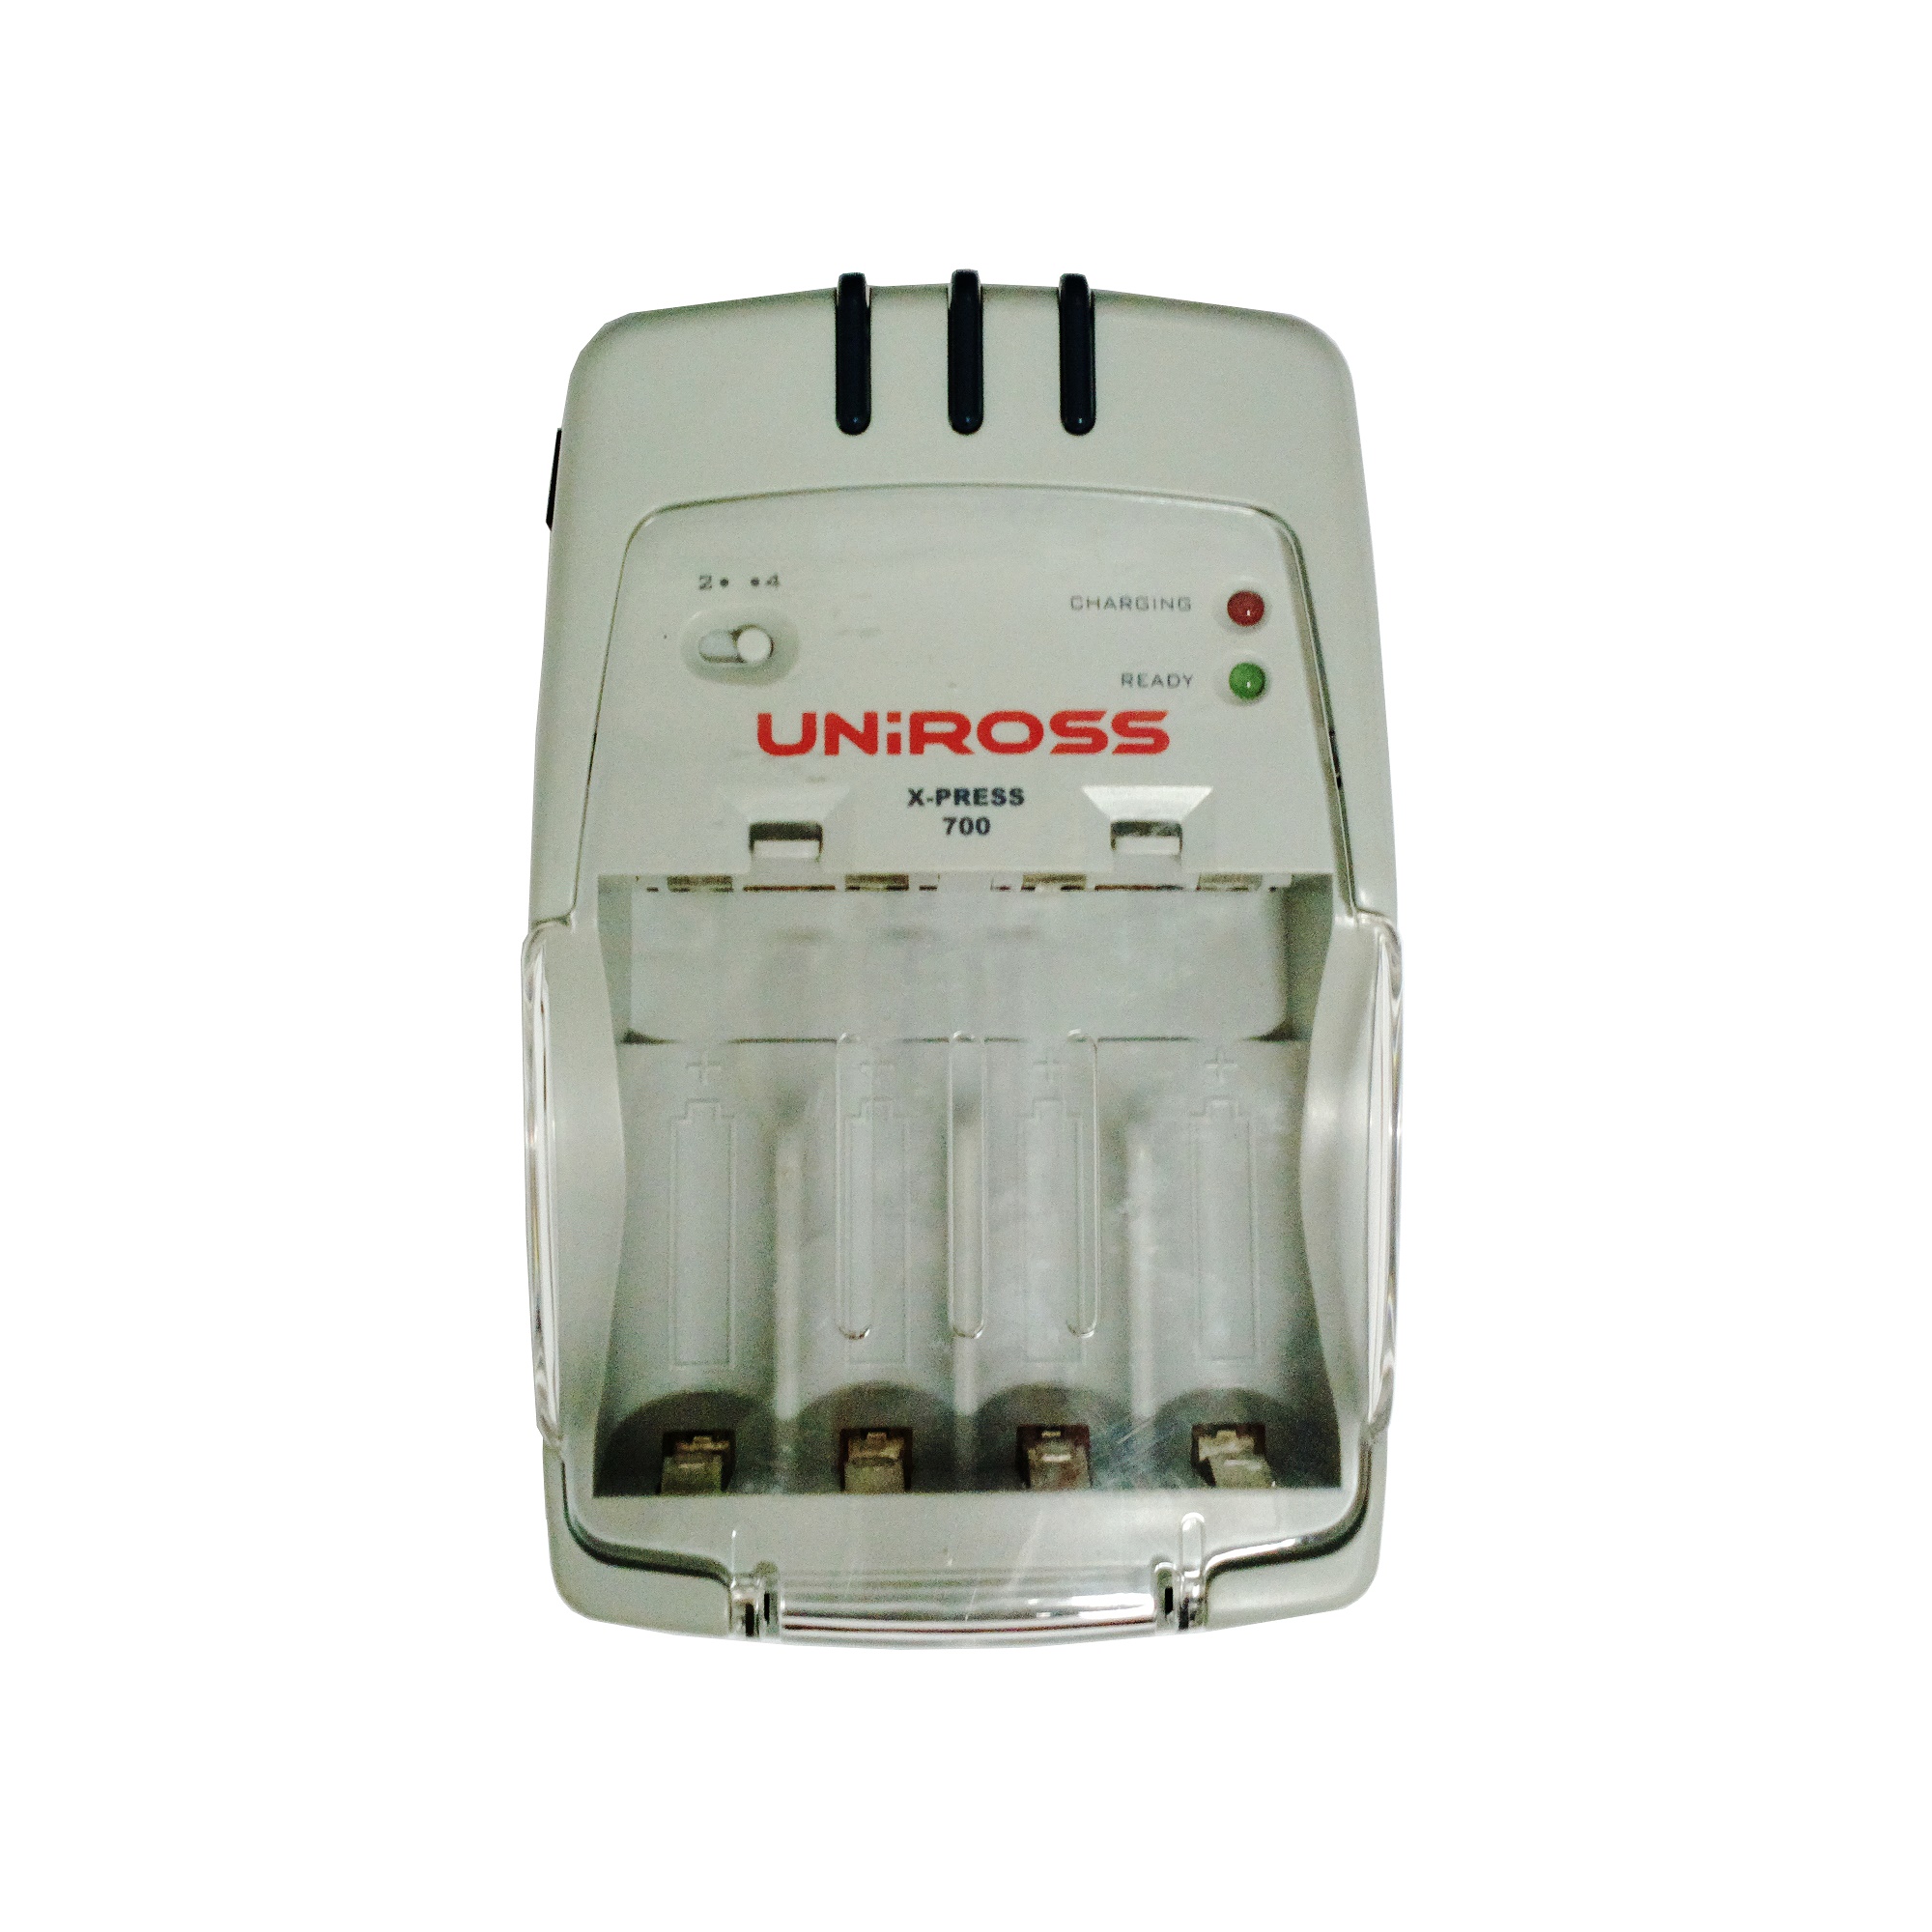 Uniross UNiROSS COMPACT CHARGER FOR 1-4   AA & AAA RECHARGEABLE  BATTERIES USB POWERED 4895122319774 